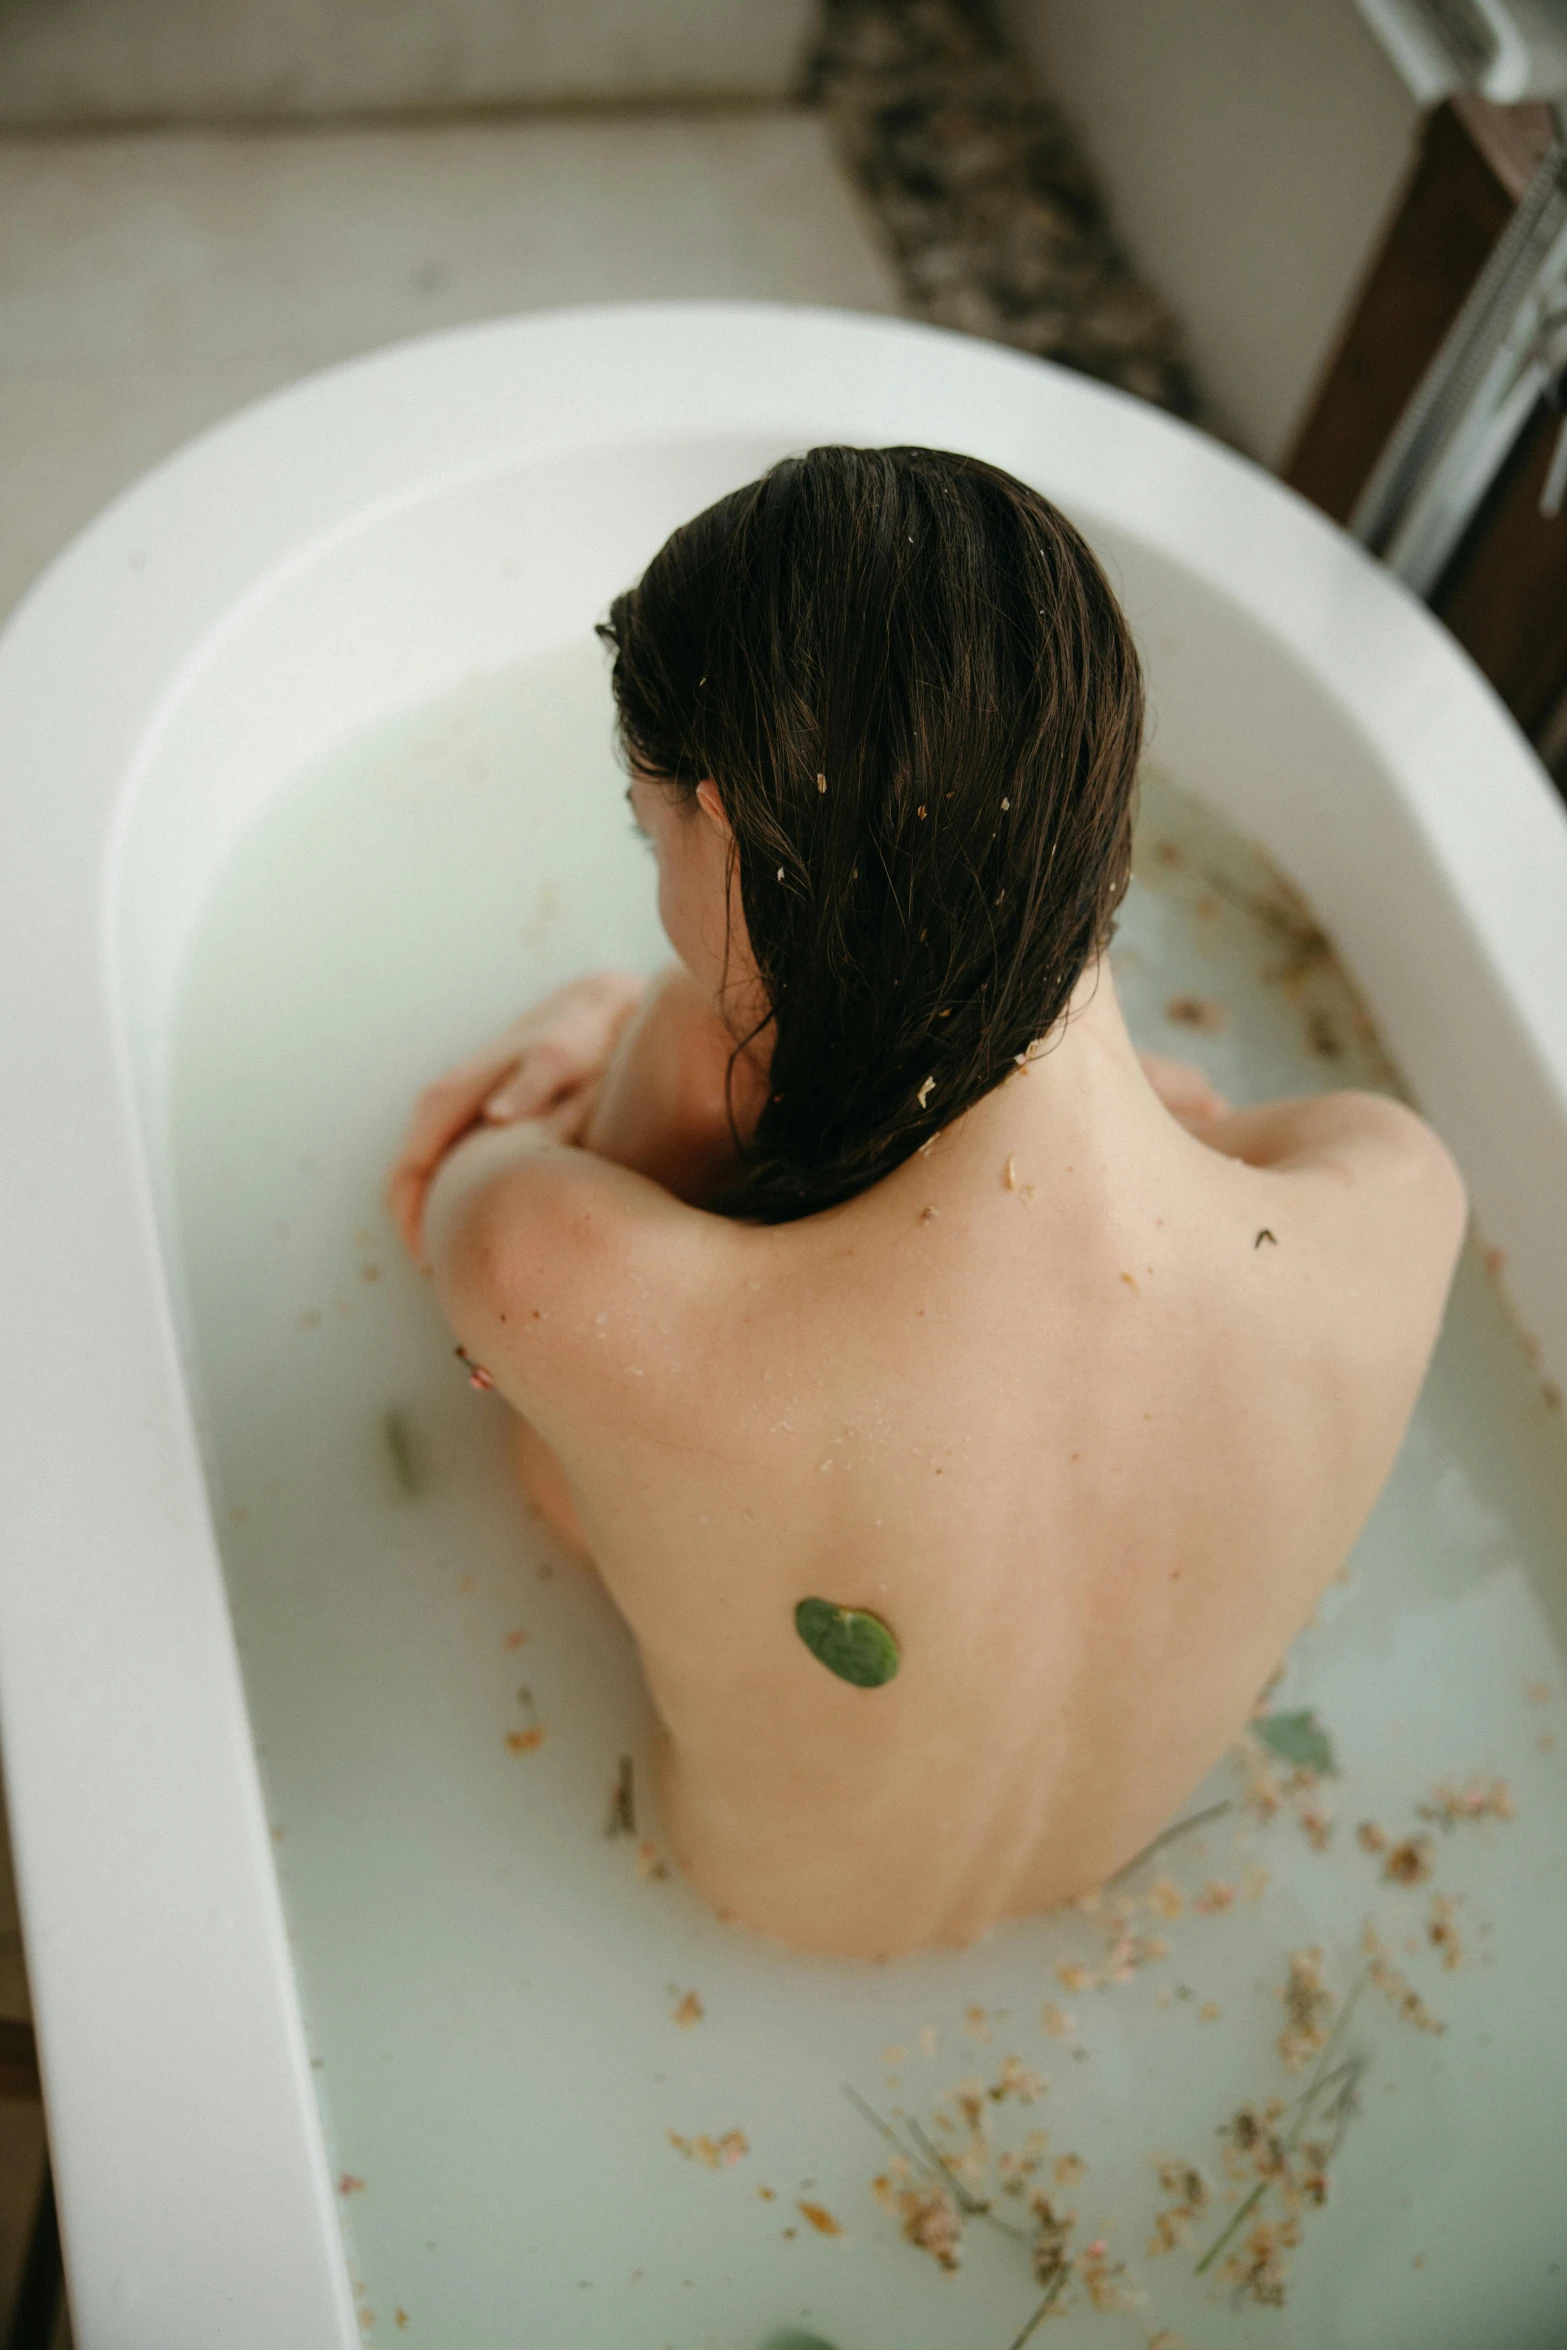 a woman sits in a bath tub filled with leaves